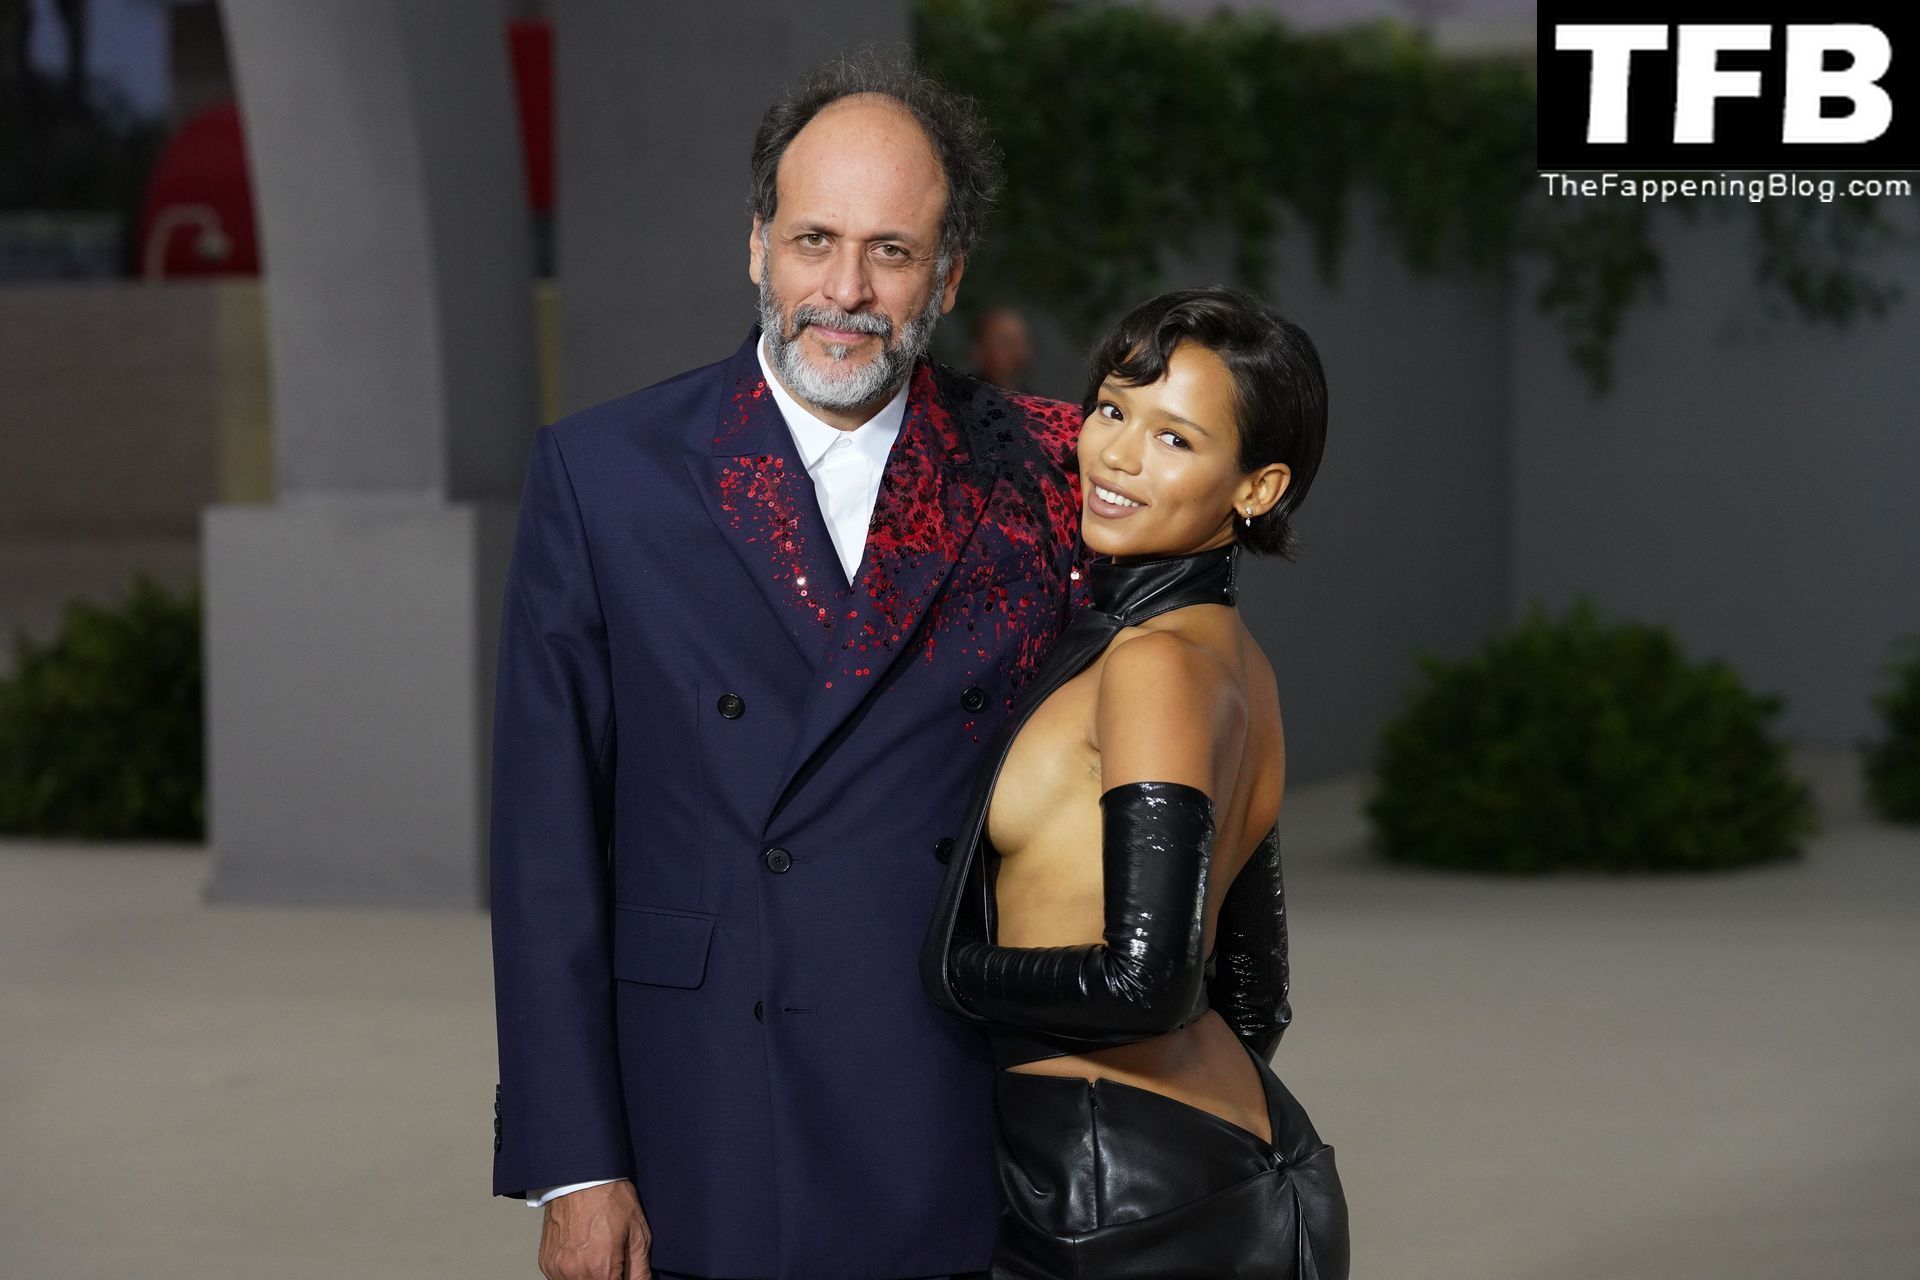 Taylor Russell Shows Off Her Sideboob at the 2nd Annual Academy Museum Gala in LA (21 Photos)